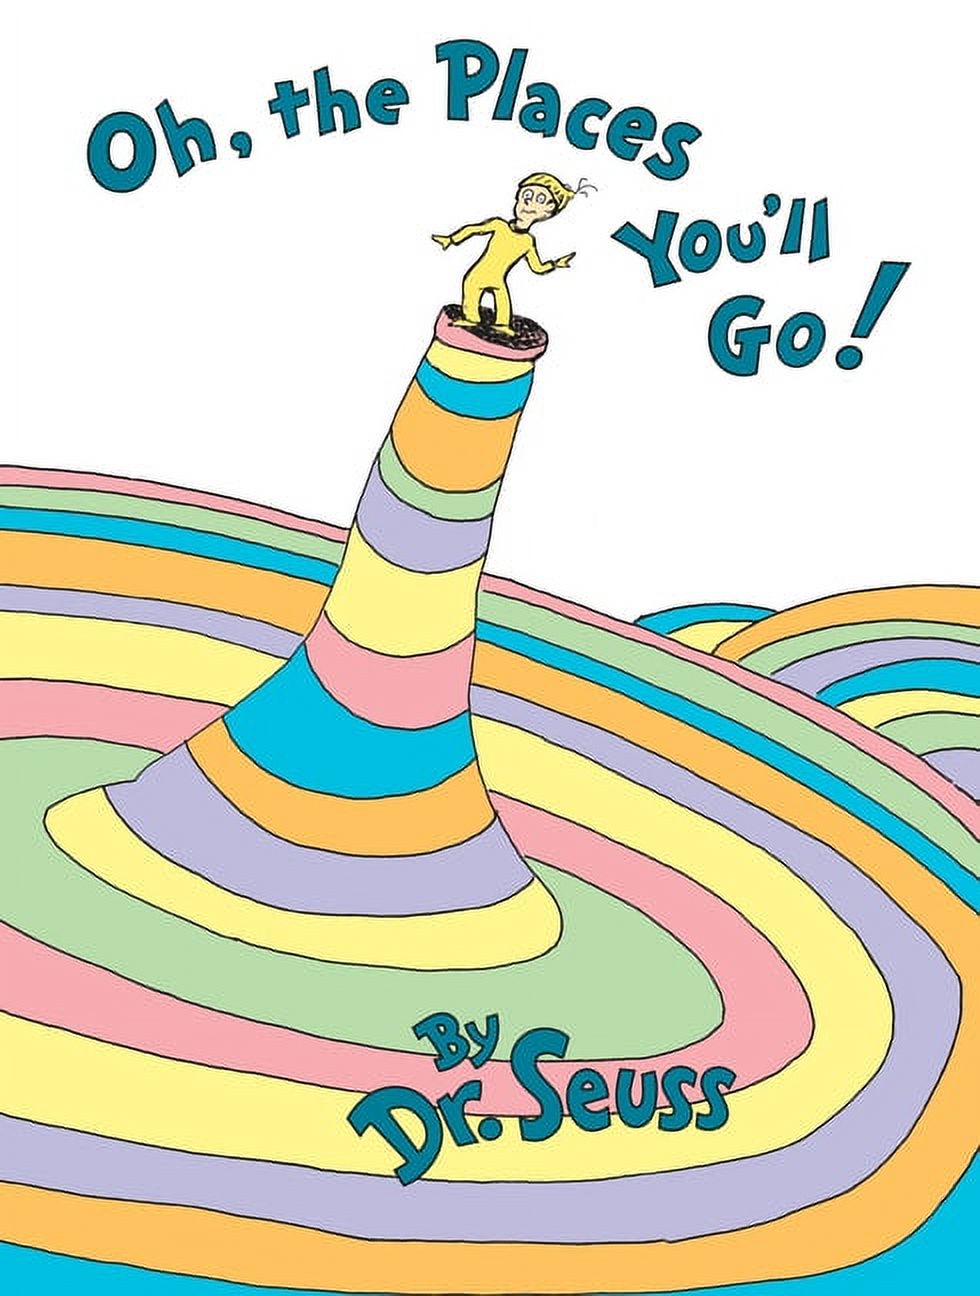 Classic Seuss: Oh, the Places You'll Go! (Hardcover) - image 1 of 2